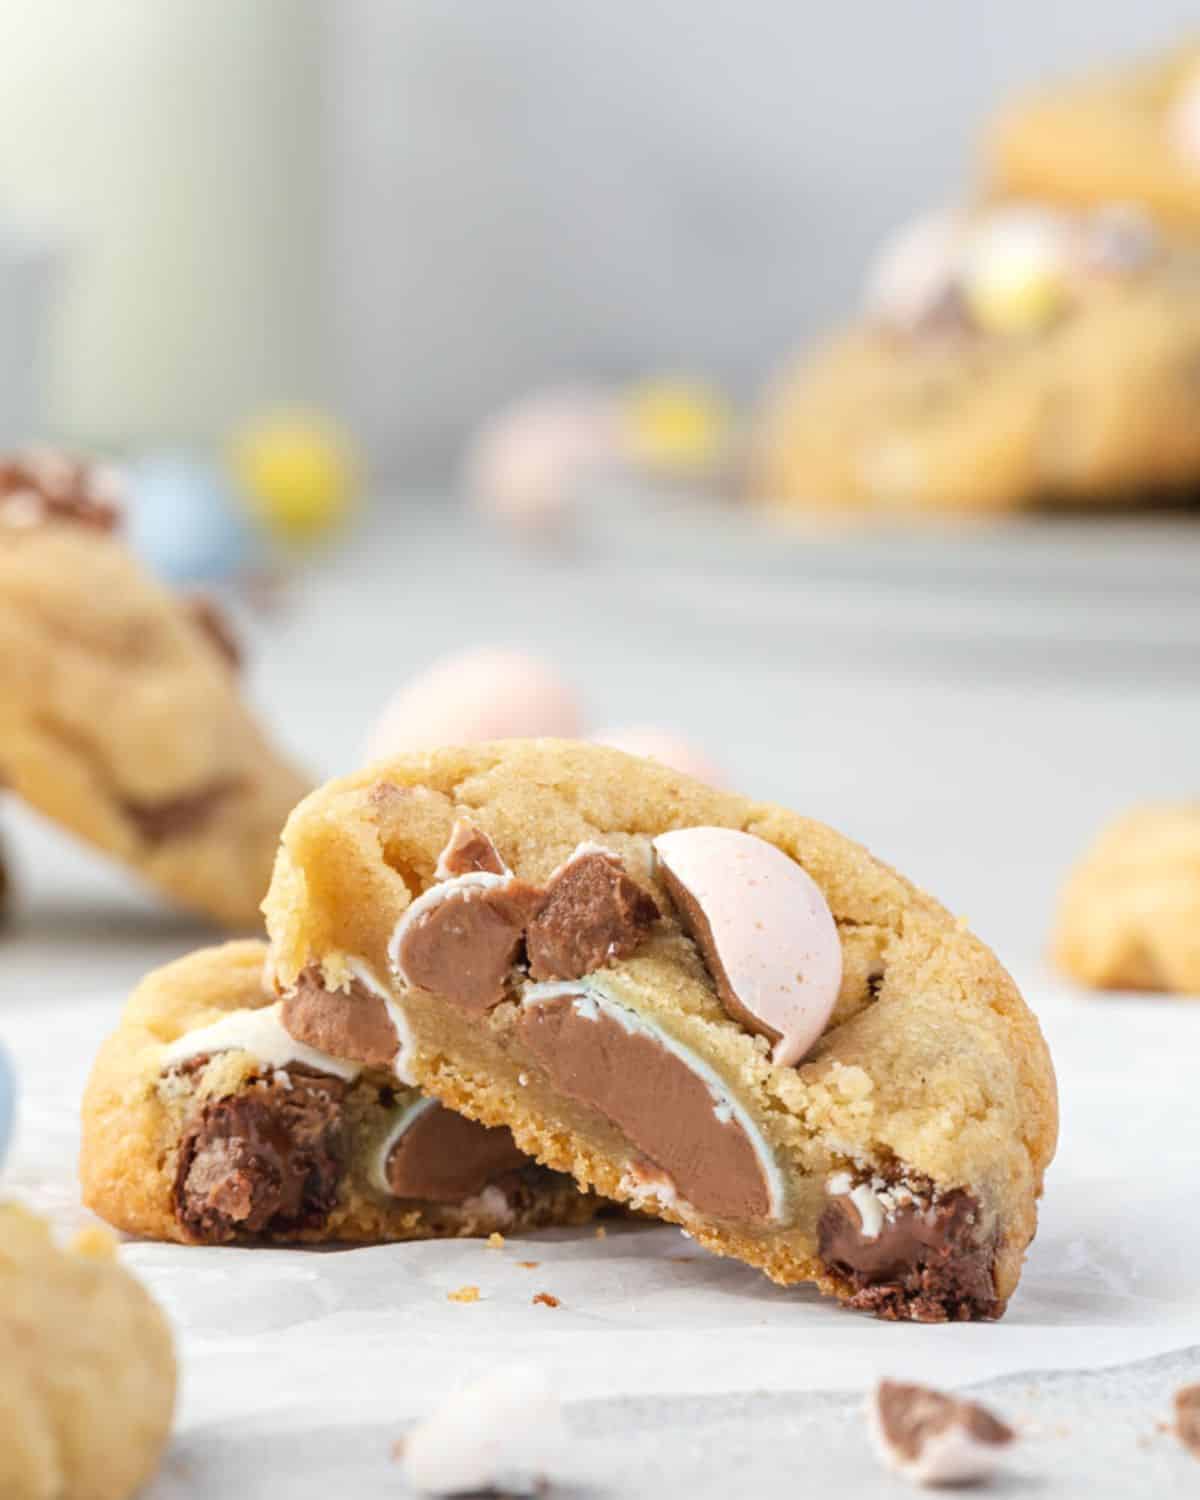 A Cadbury egg cookie cut in half and singled on each other, showing the chunks of chocolate inside the cookie.